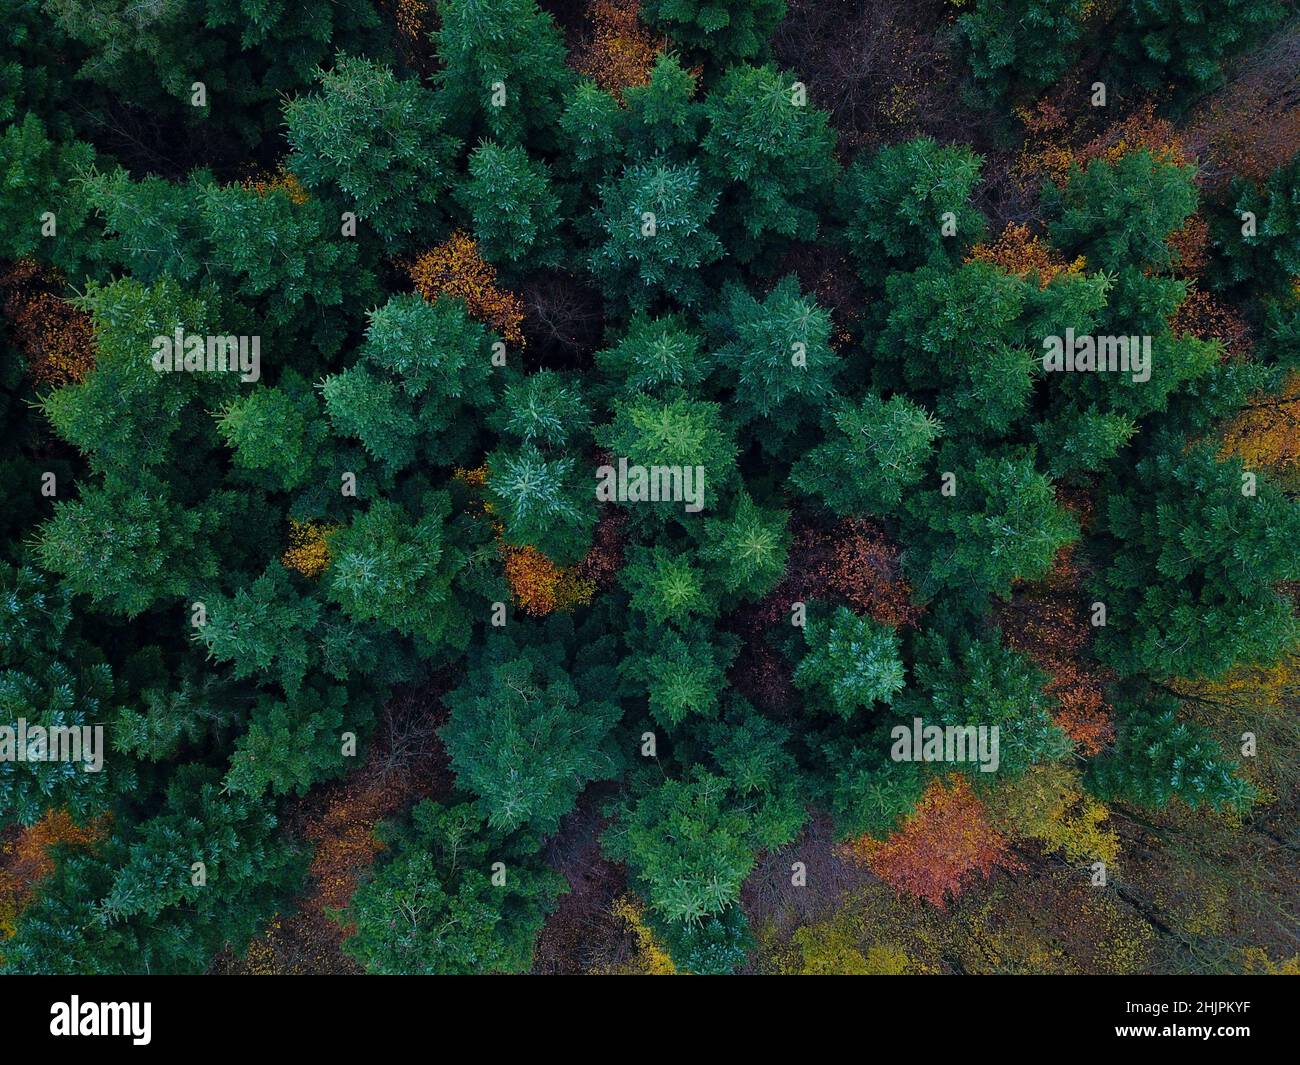 Mixed woodland seen from above, photographed with a drone Stock Photo